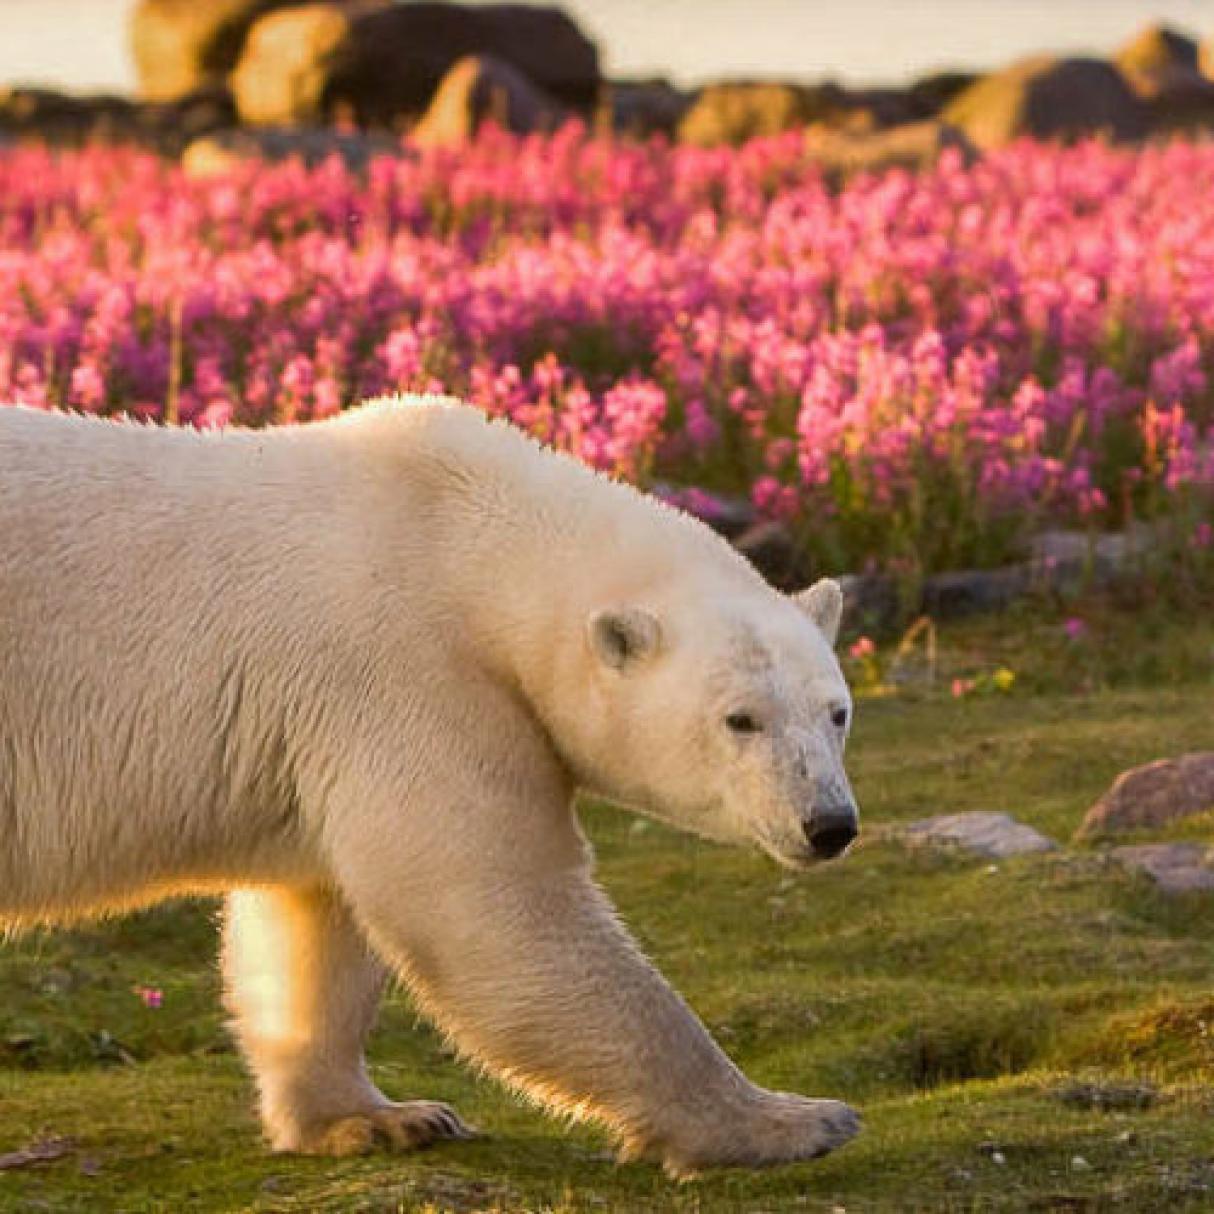 A white polar bear walks along the grass surrounded by pink wildflows illumated by the warm glow of the sun. 